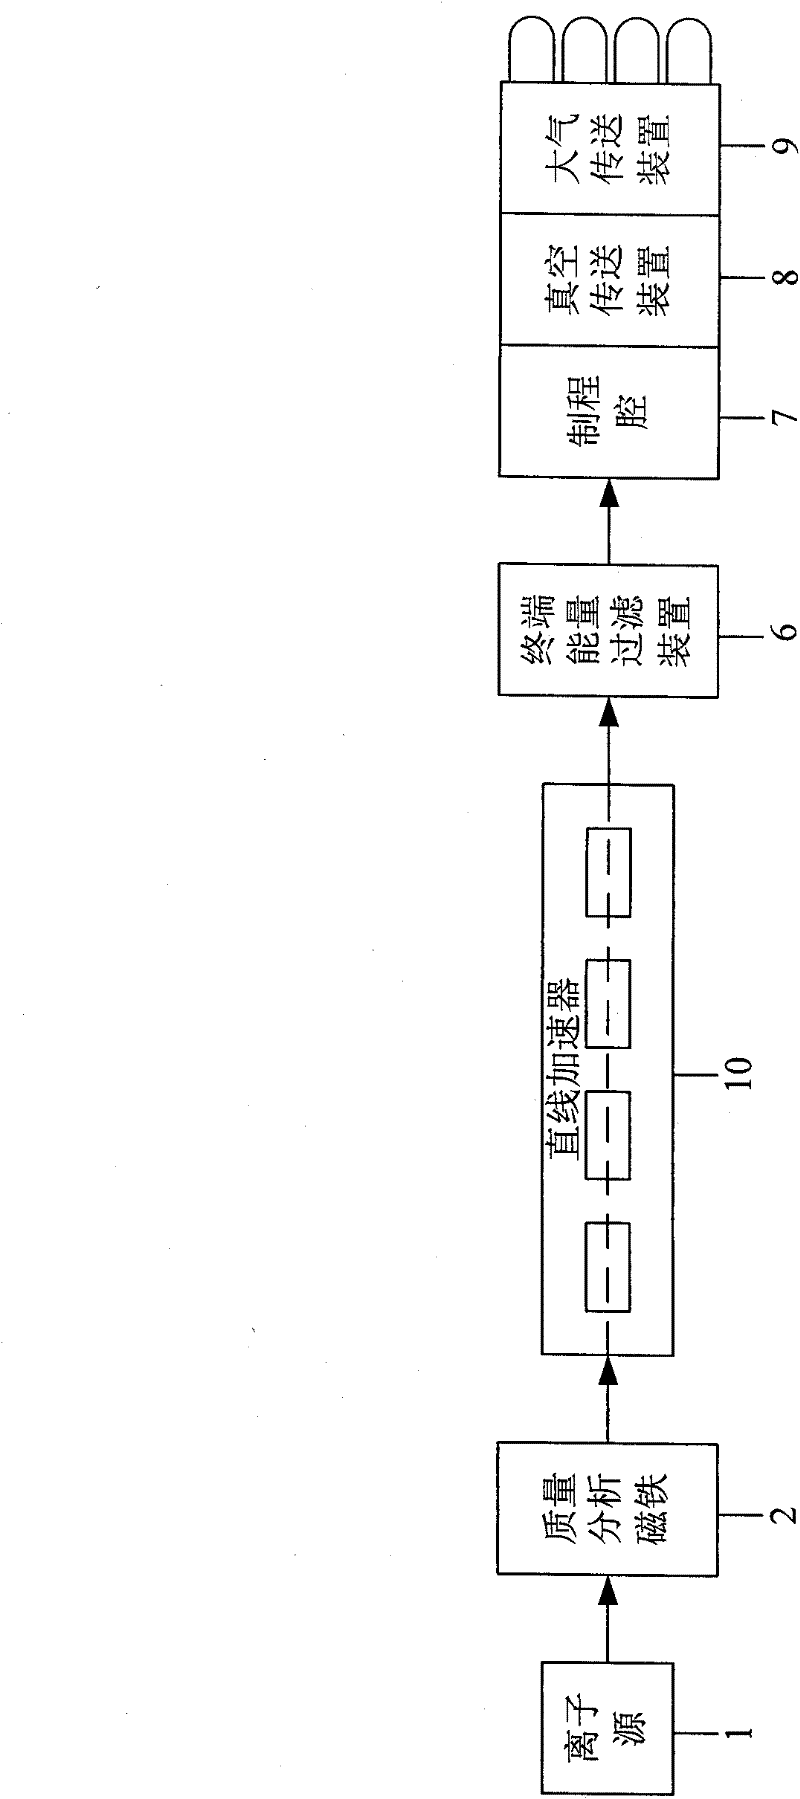 Ion implanting system and method